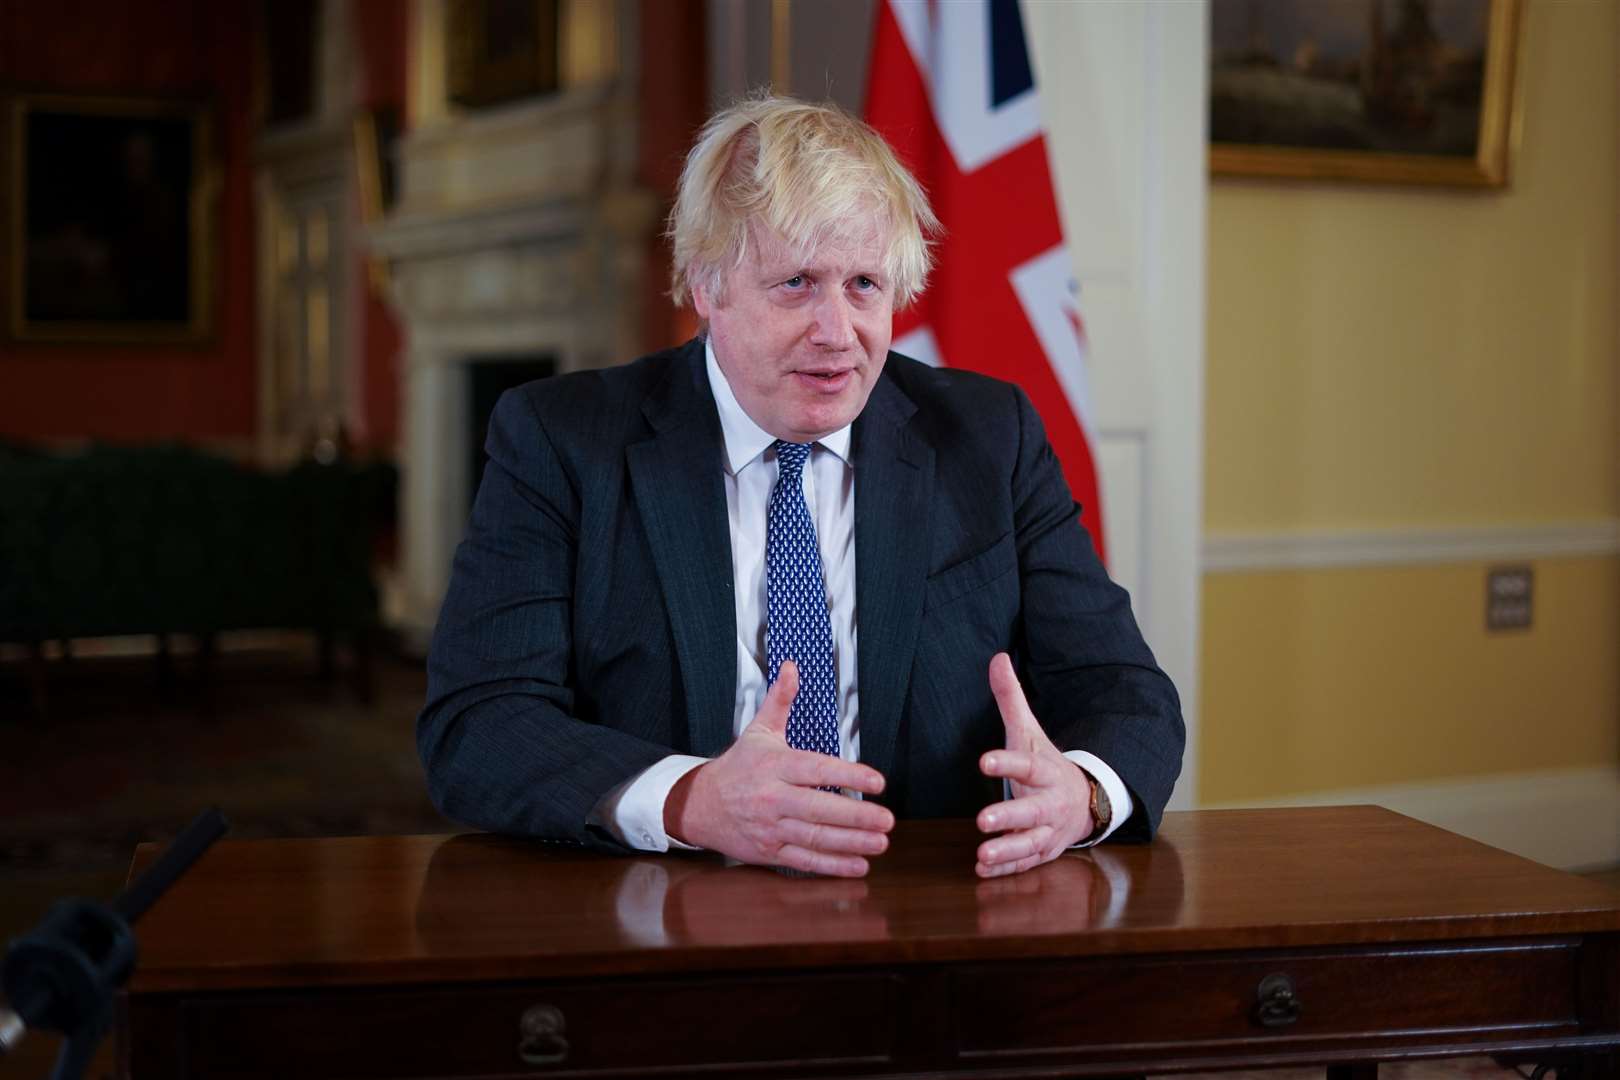 Prime Minister Boris Johnson urged people to get their jabs (Kirsty O’Connor/PA)